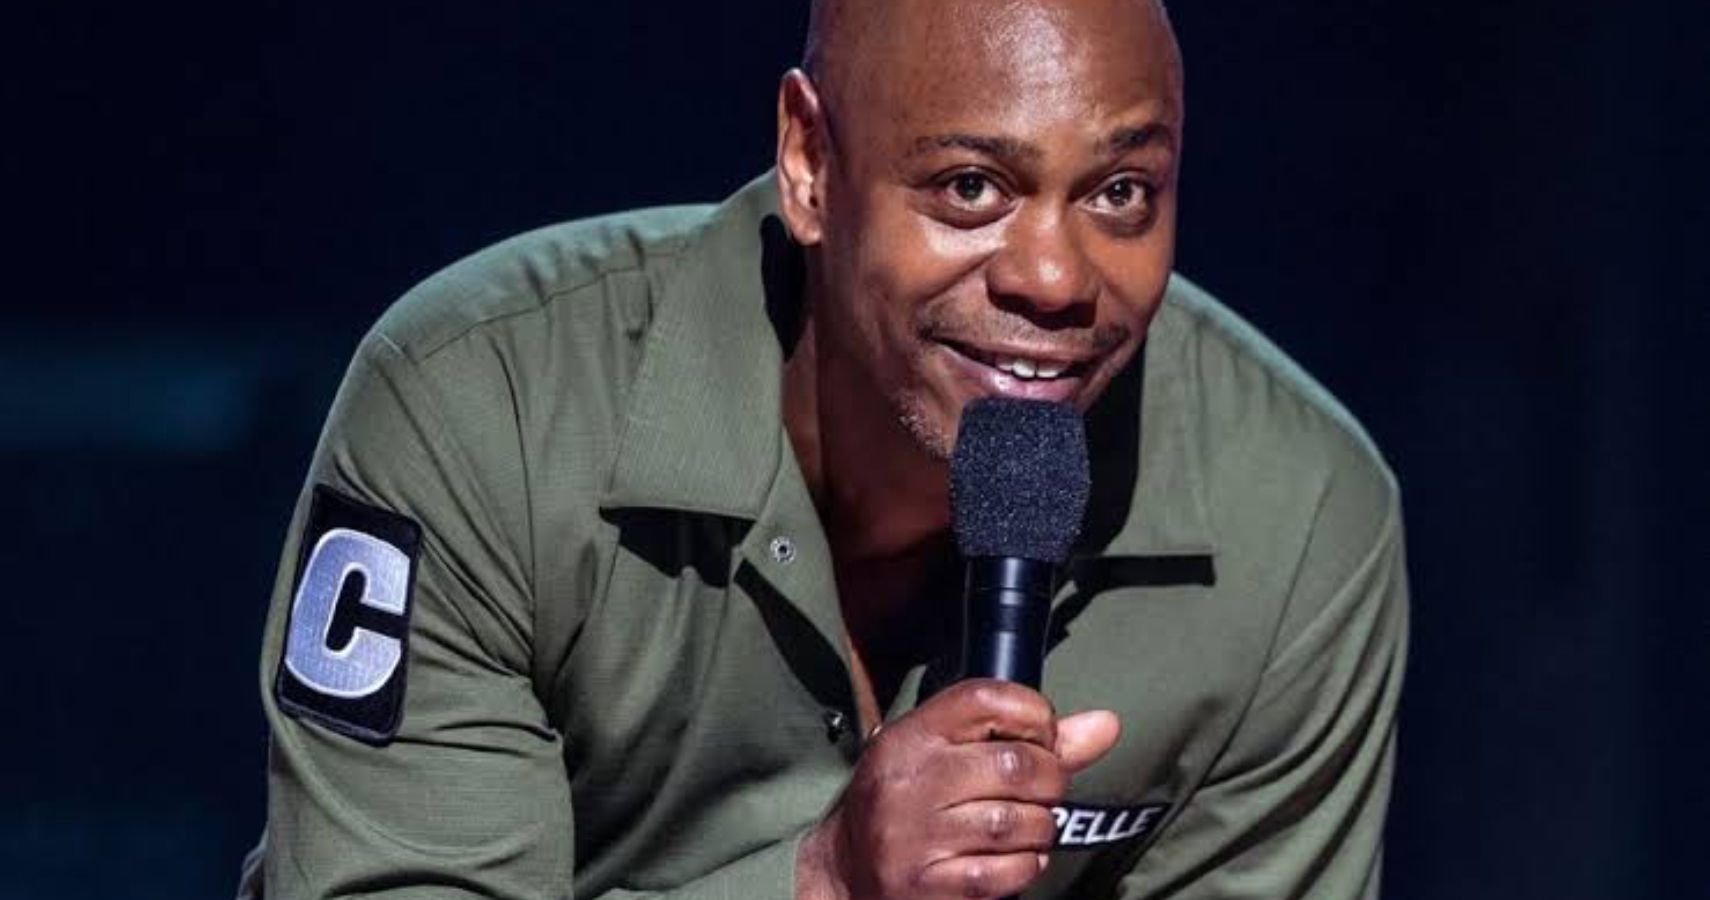 Stand-up Comedian Dave Chappelle Received $25K Worth Of Diamond & Gold Chain From Trae Tha Truth